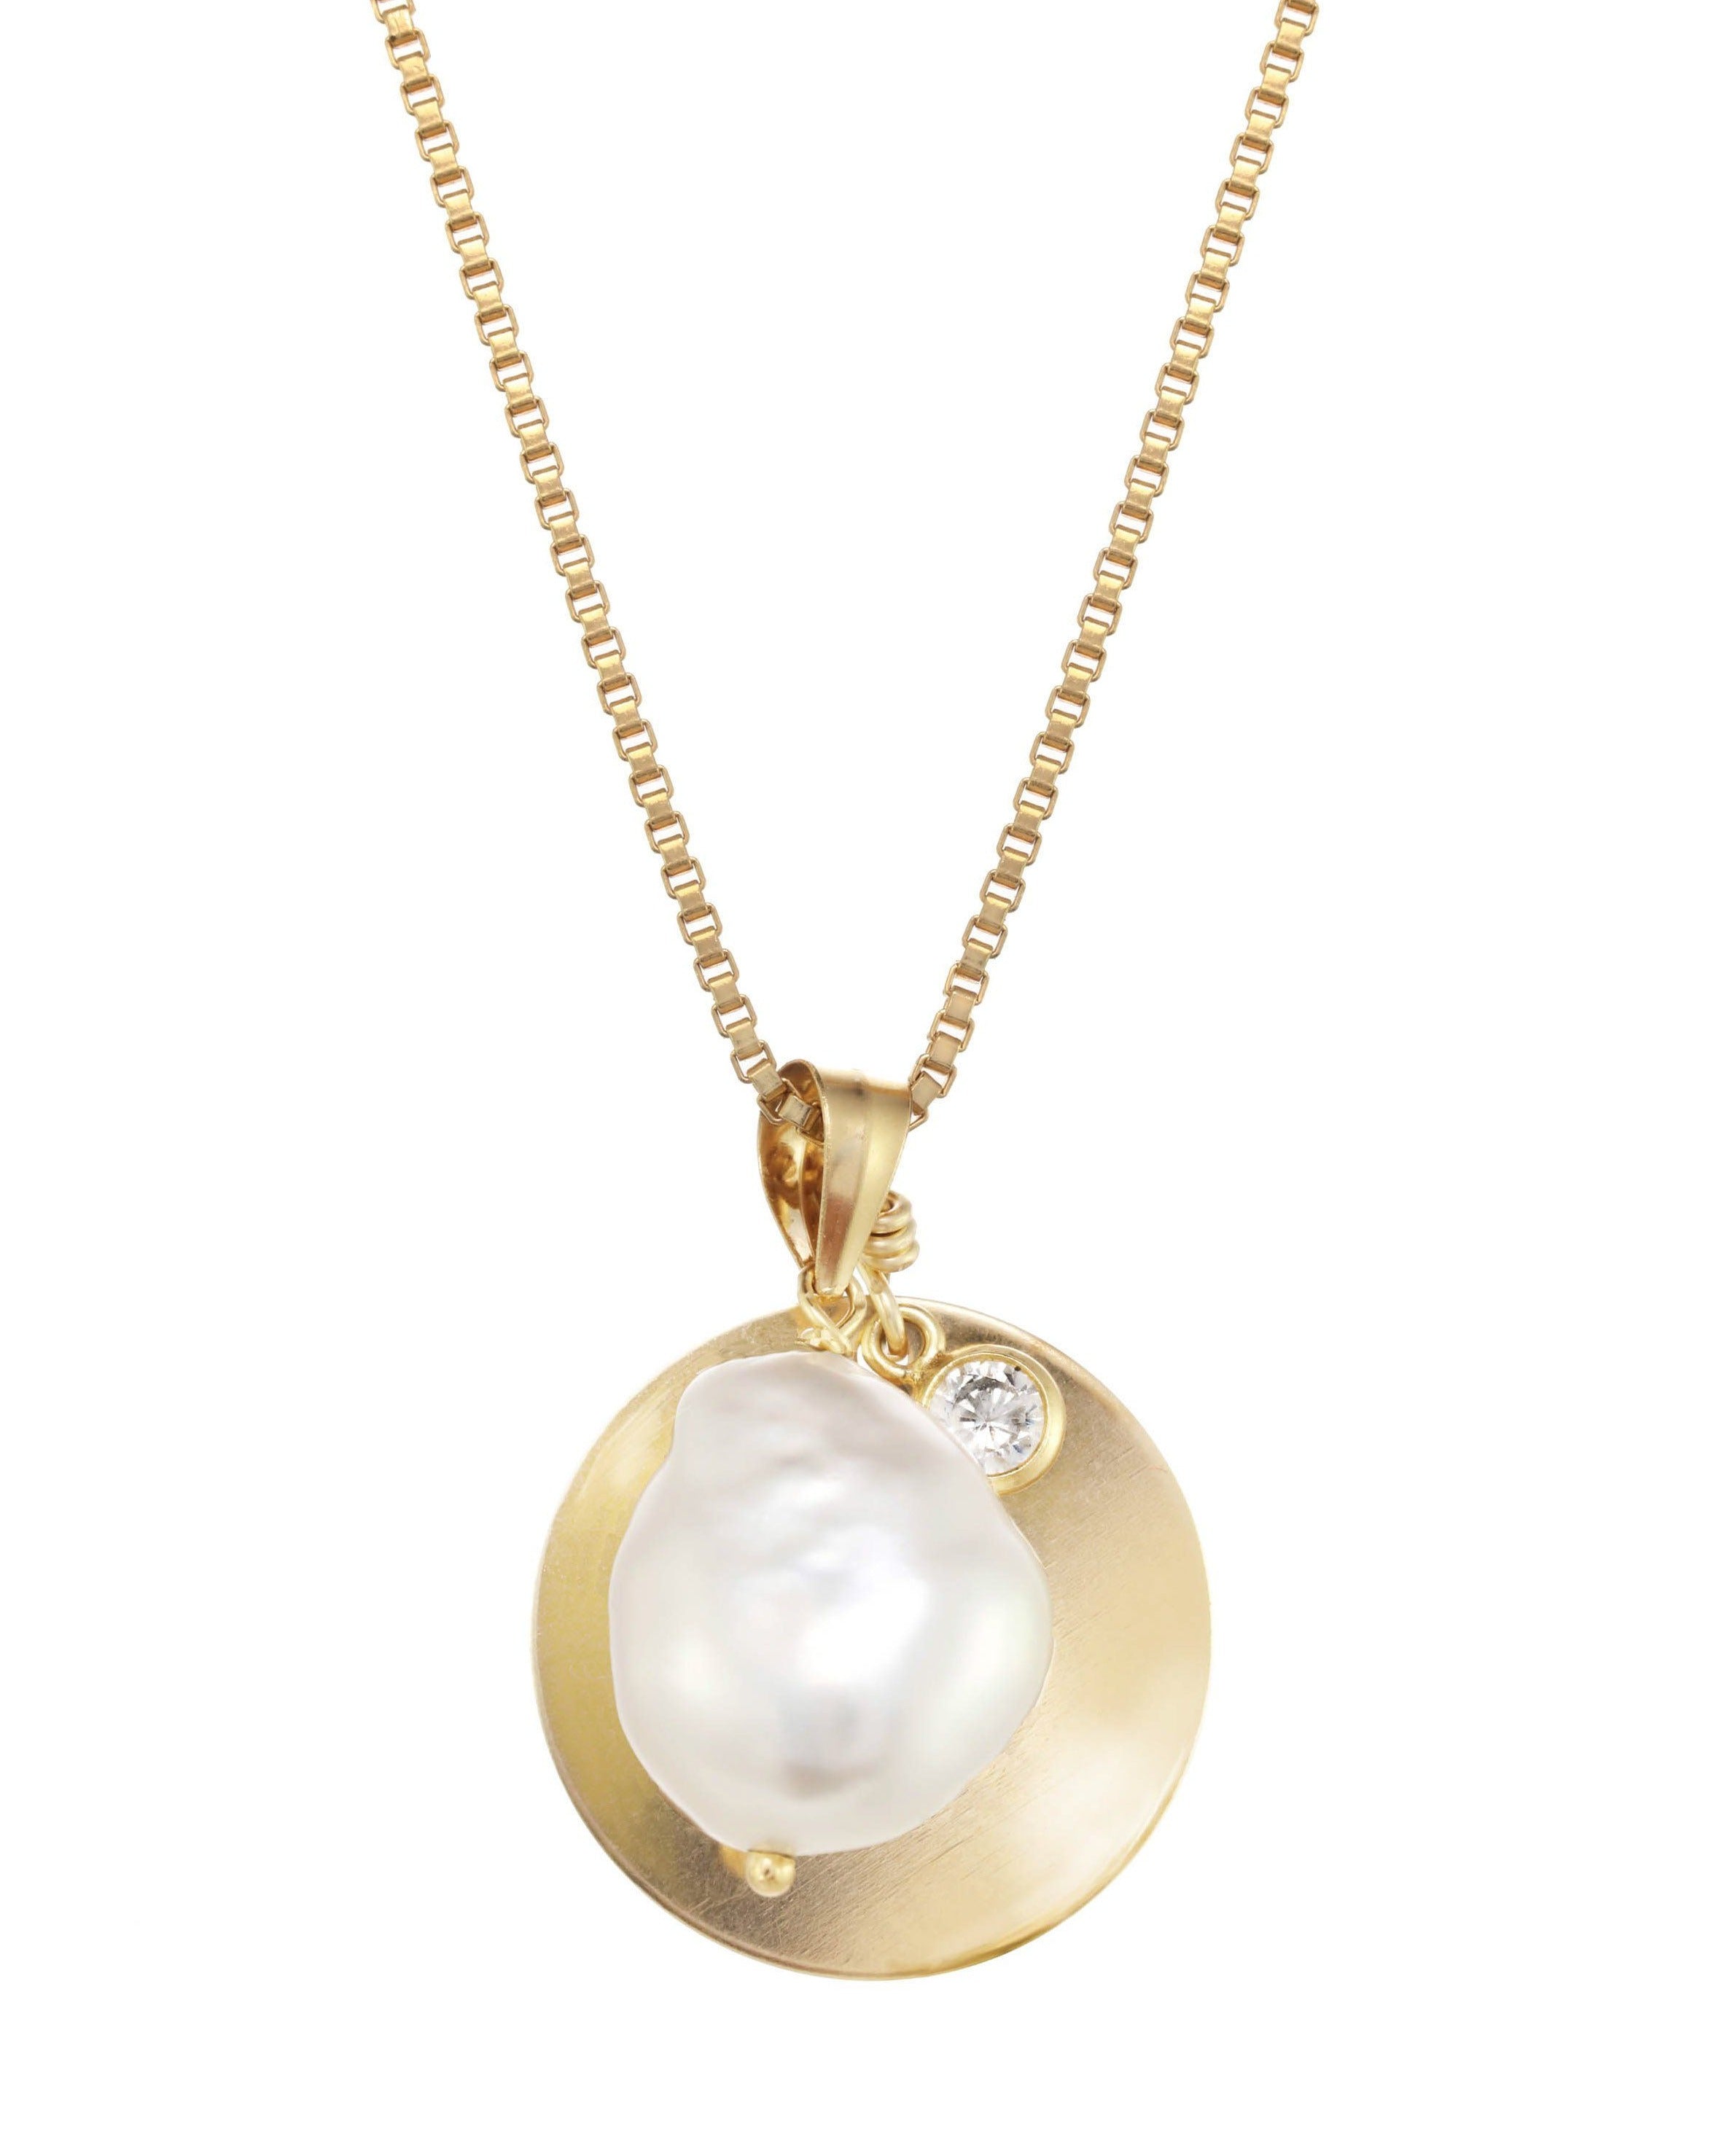 Sylet Necklace by KOZAKH. A 16 to 18 inch adjustable length necklace, crafted in 14K Gold Filled, featuring a 9mm Oval pearl, a 16mm Coin medallion, and a 3mm Cubic Zirconia bezel.